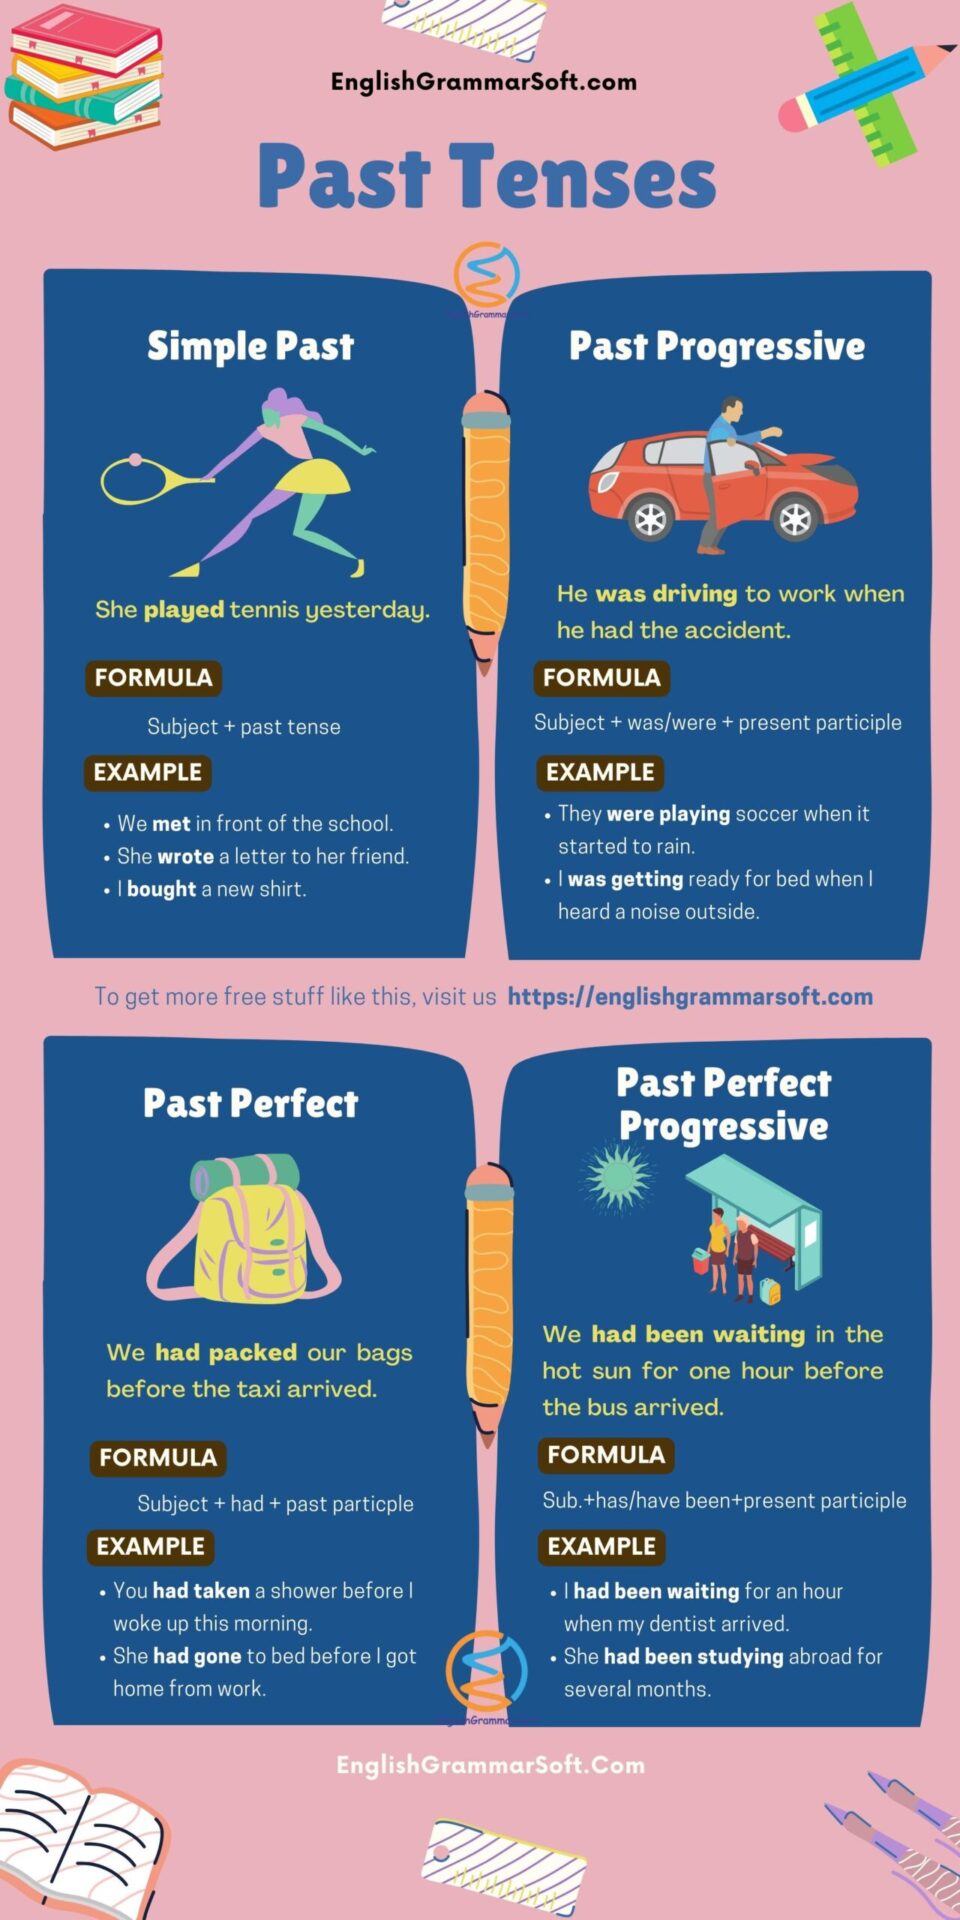 Past Tenses of Verbs (Examples & Structure)